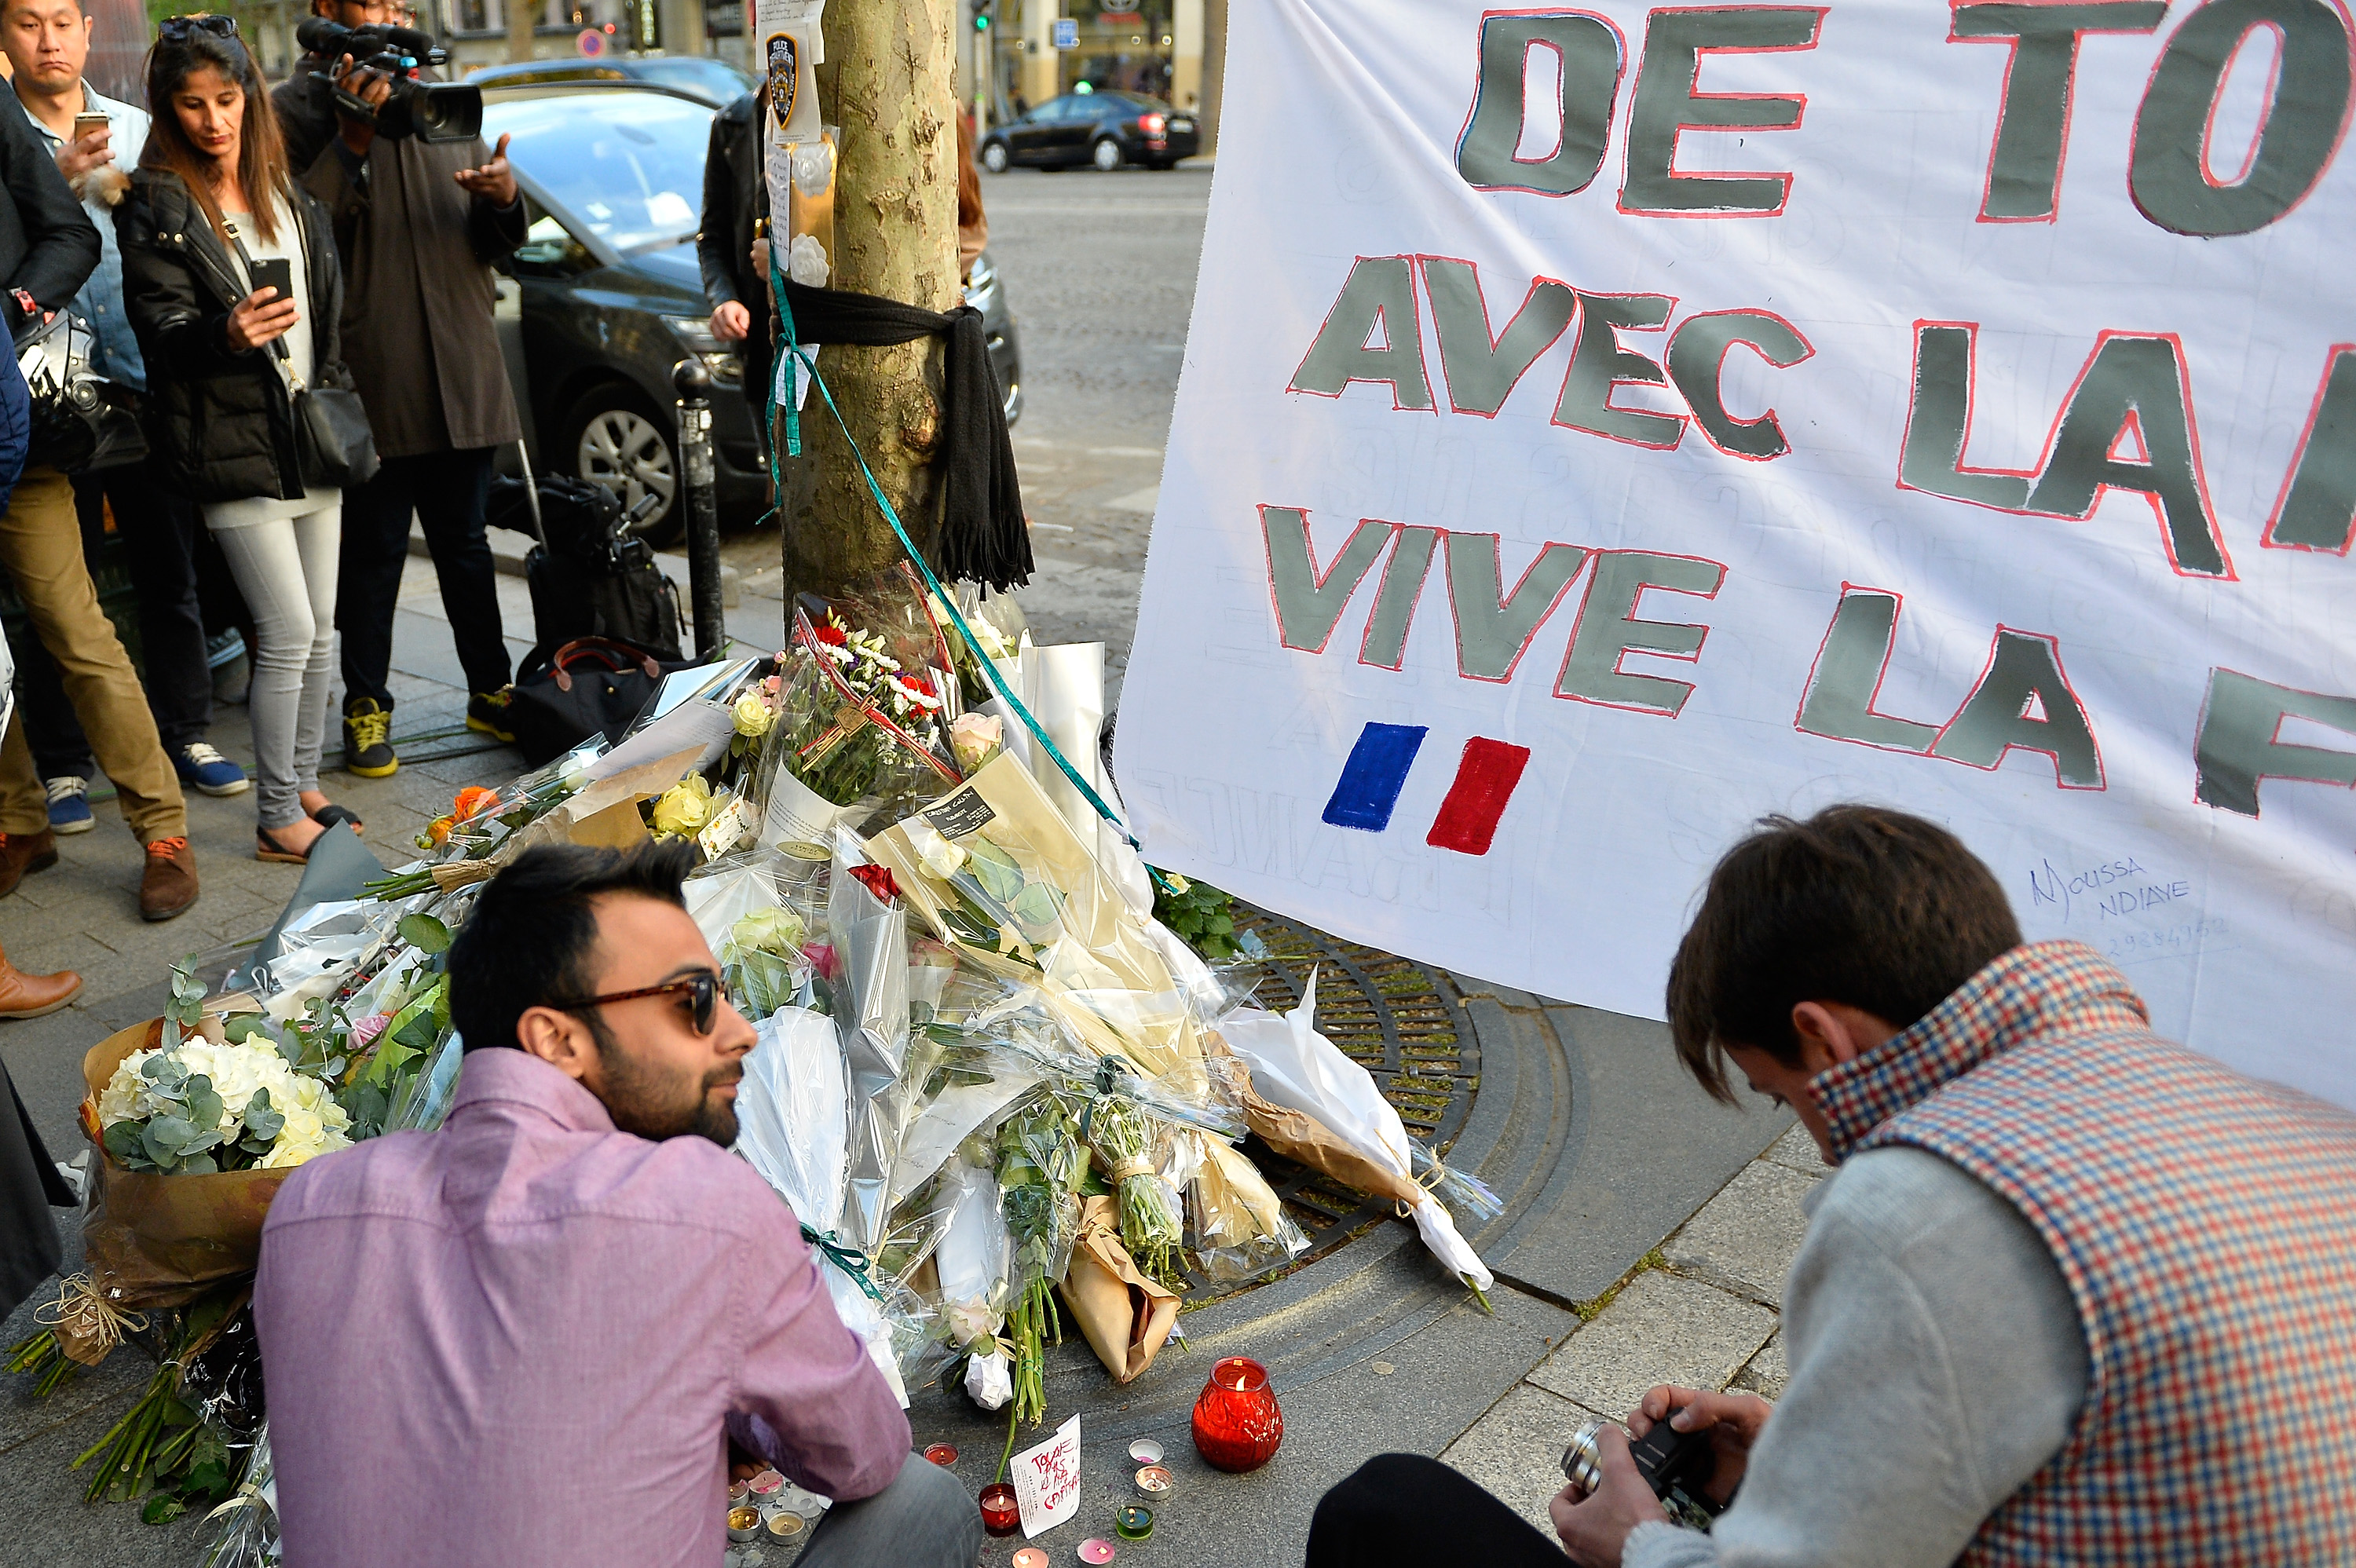 People leave flowers as a tribute to the police officer who lost his life on the Champs-Elysées boulevard in Paris when a gunman opened fire on police officers, one day after the attack, on April 21, 2017. (Aurelien Meunier—Getty Images)